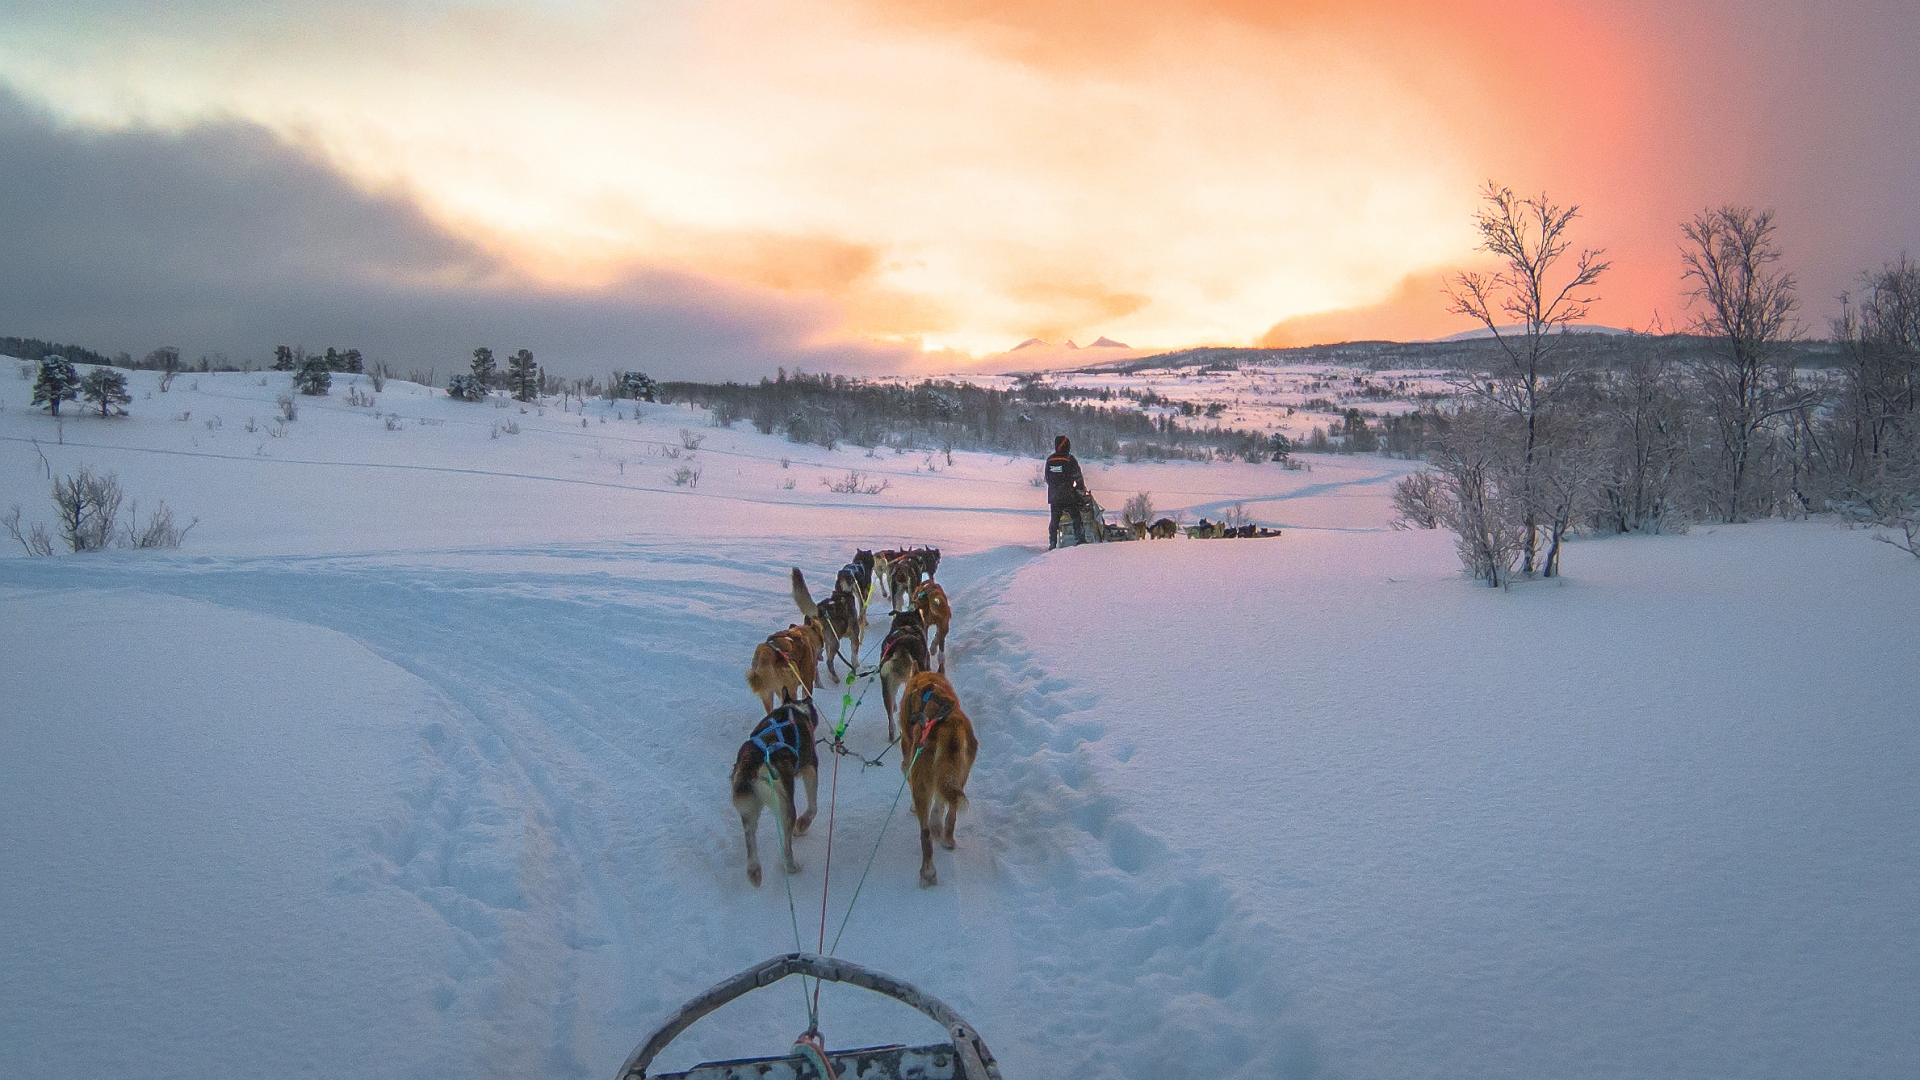 Dogsledding in snowy landscape with pink skies